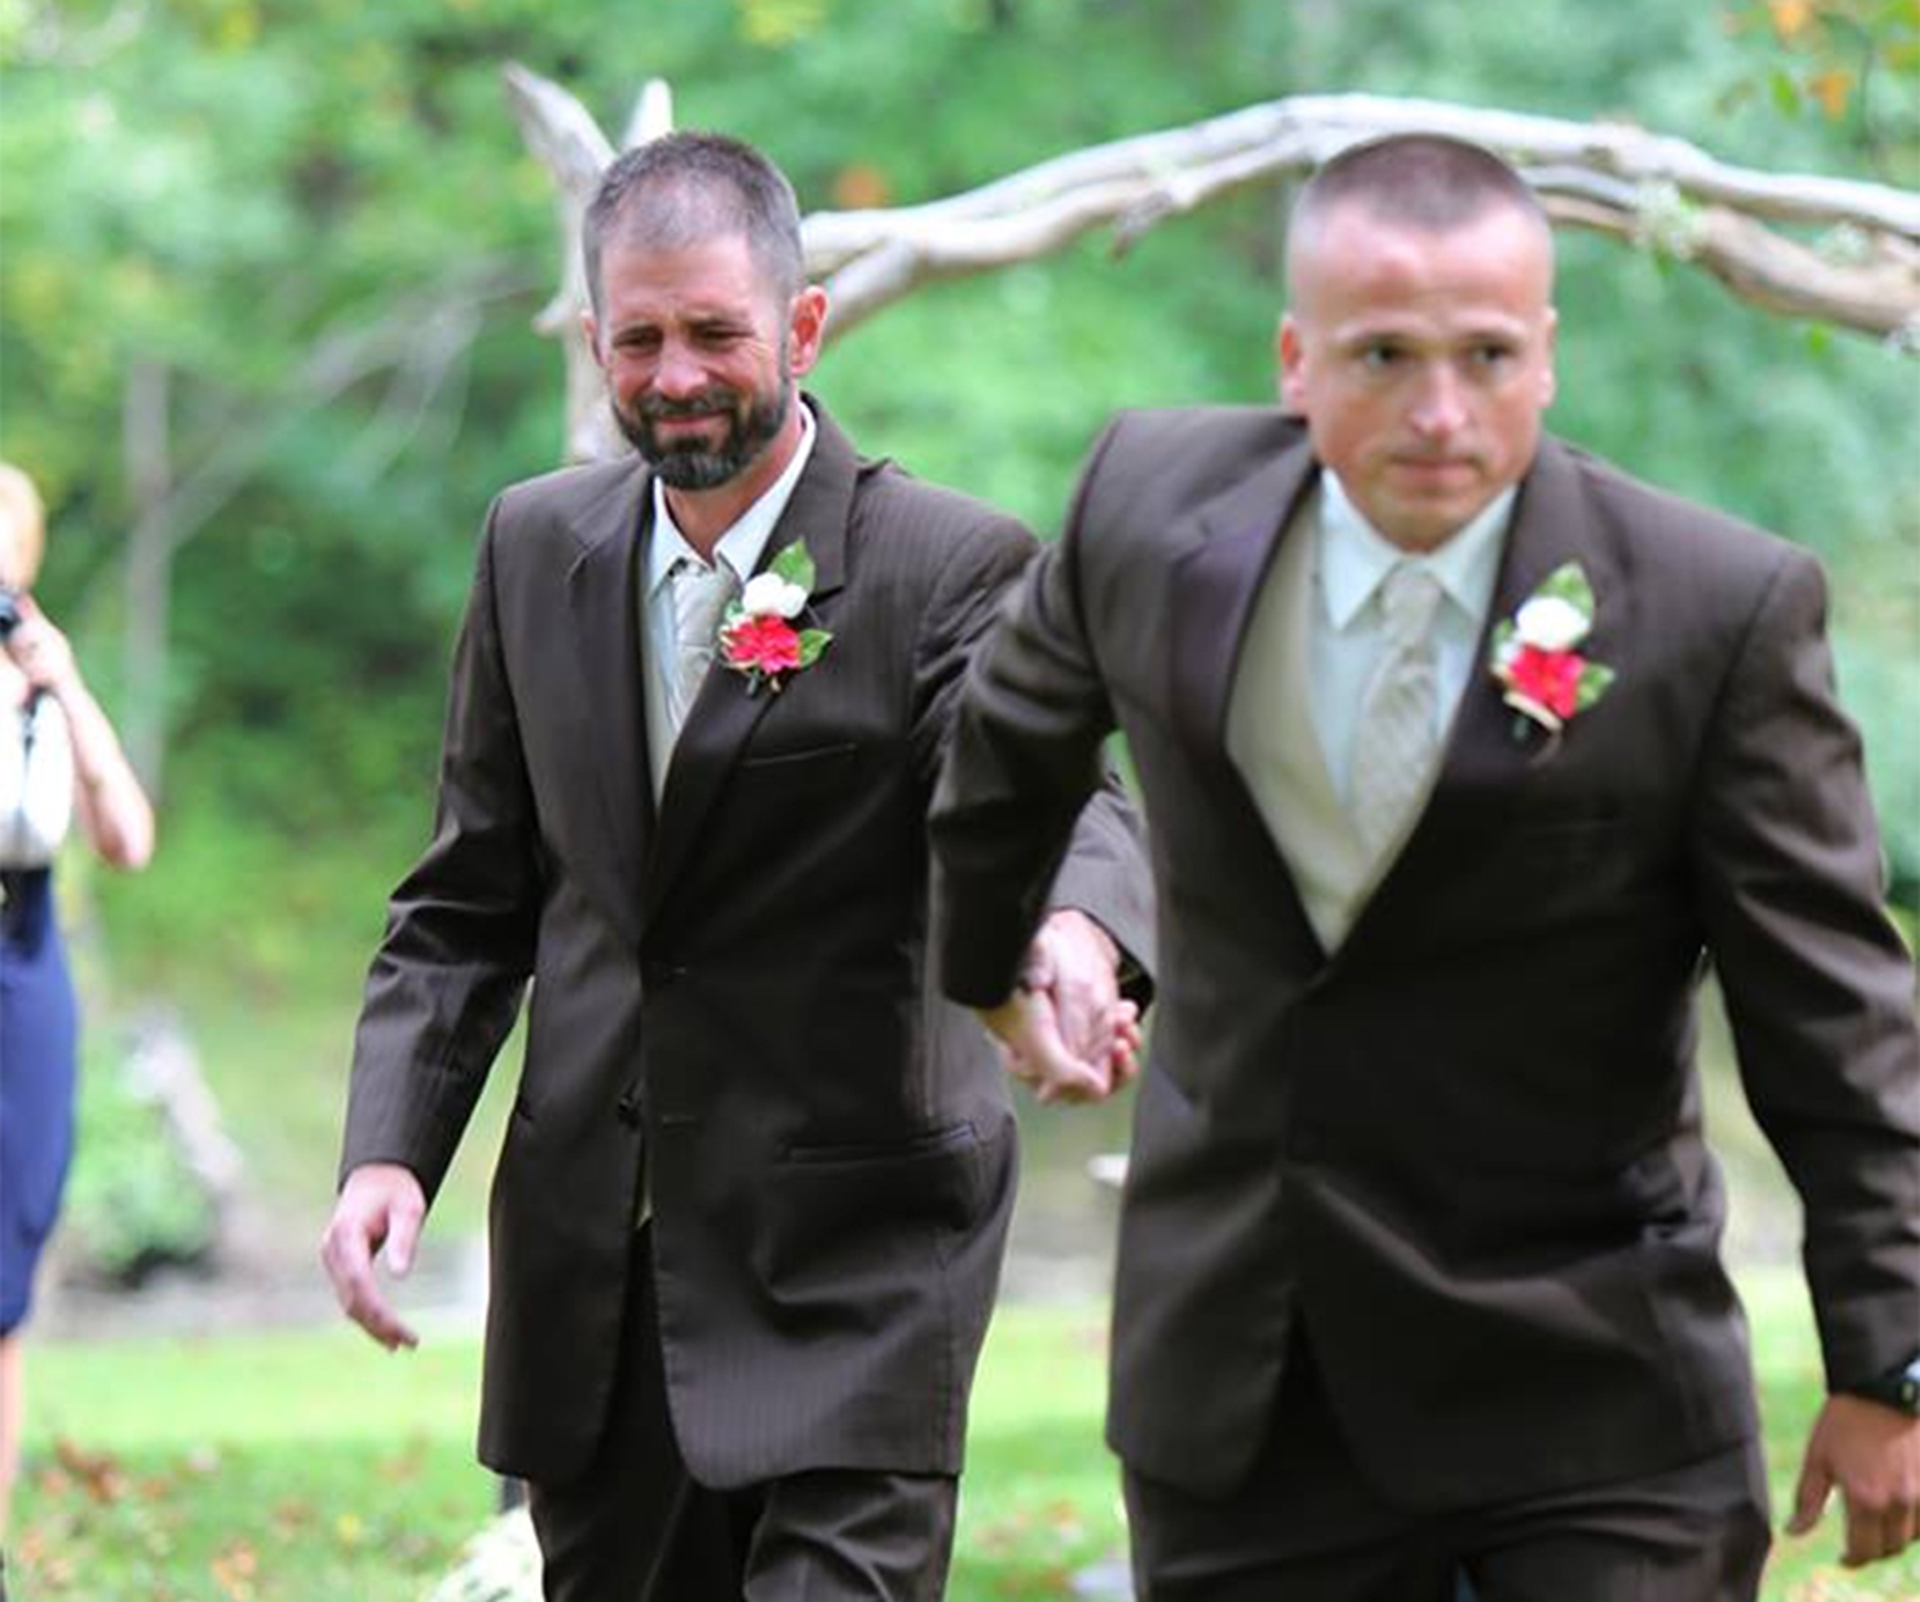 Father’s heartwarming gesture to bride’s step-father goes viral